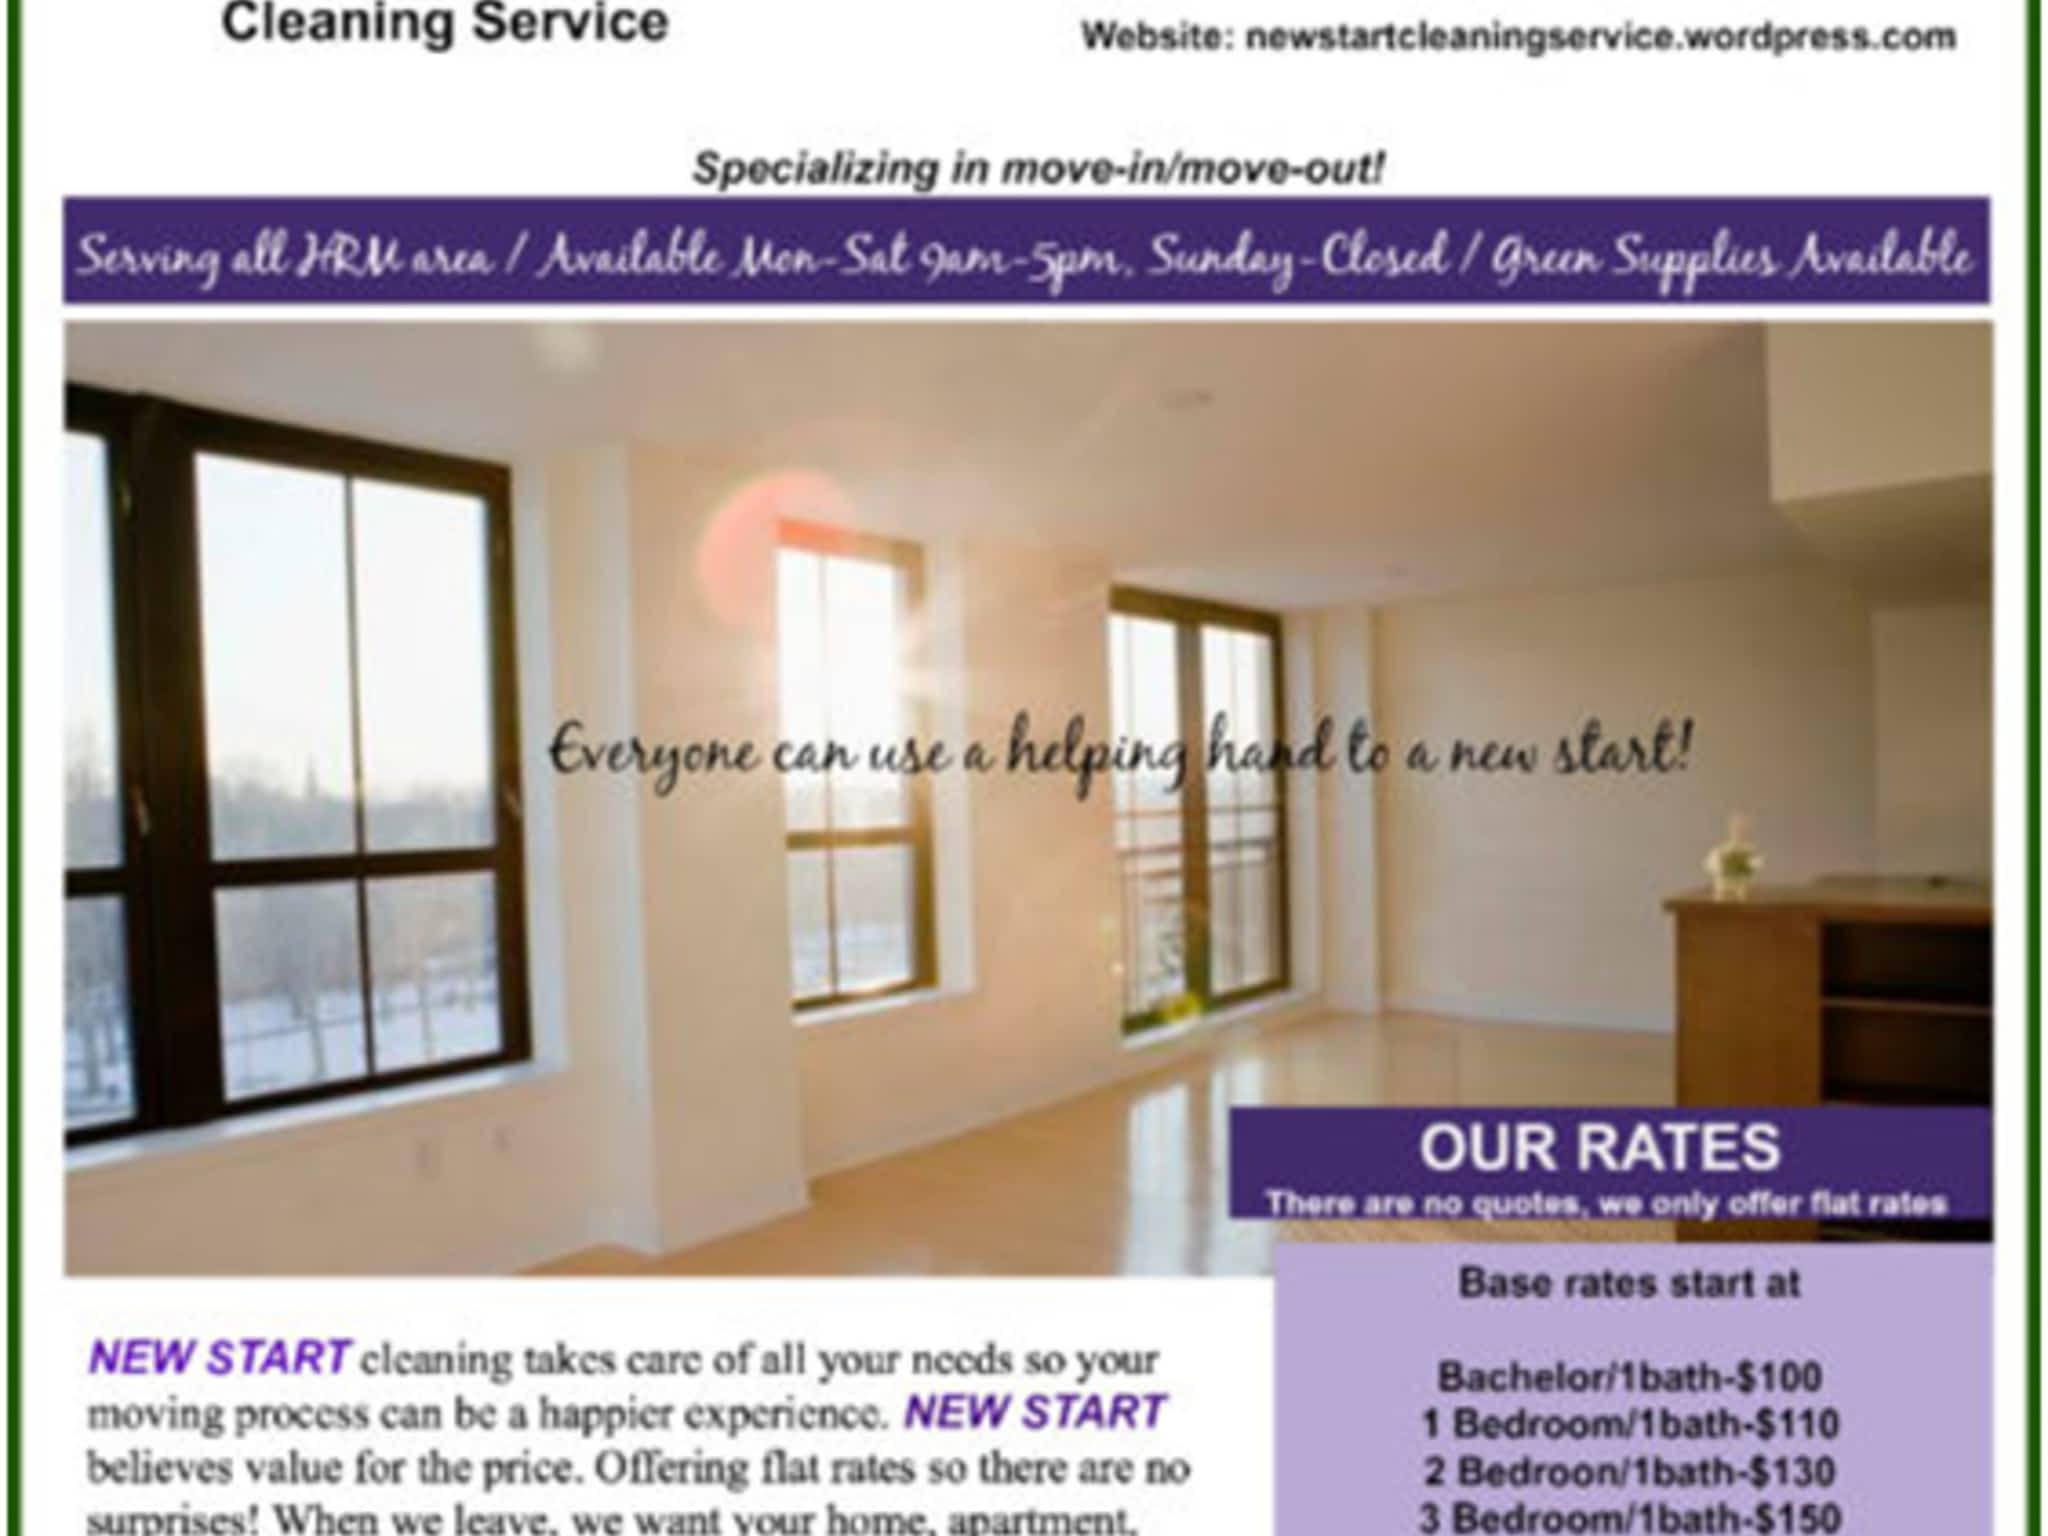 photo New Start Cleaning Service